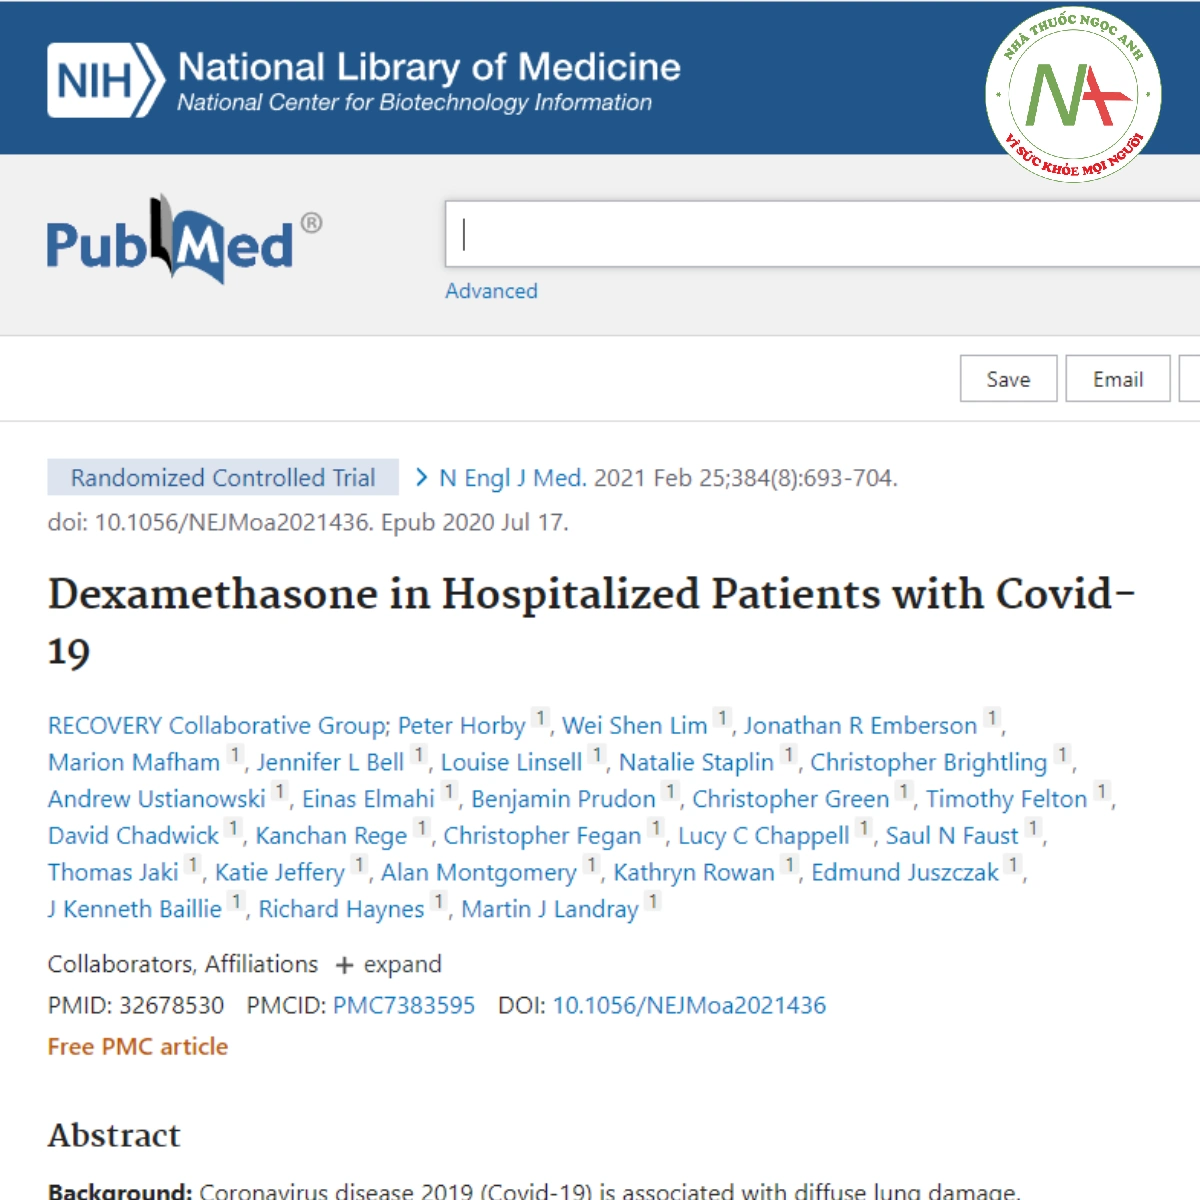 Dexamethasone in Hospitalized Patients with Covid-19